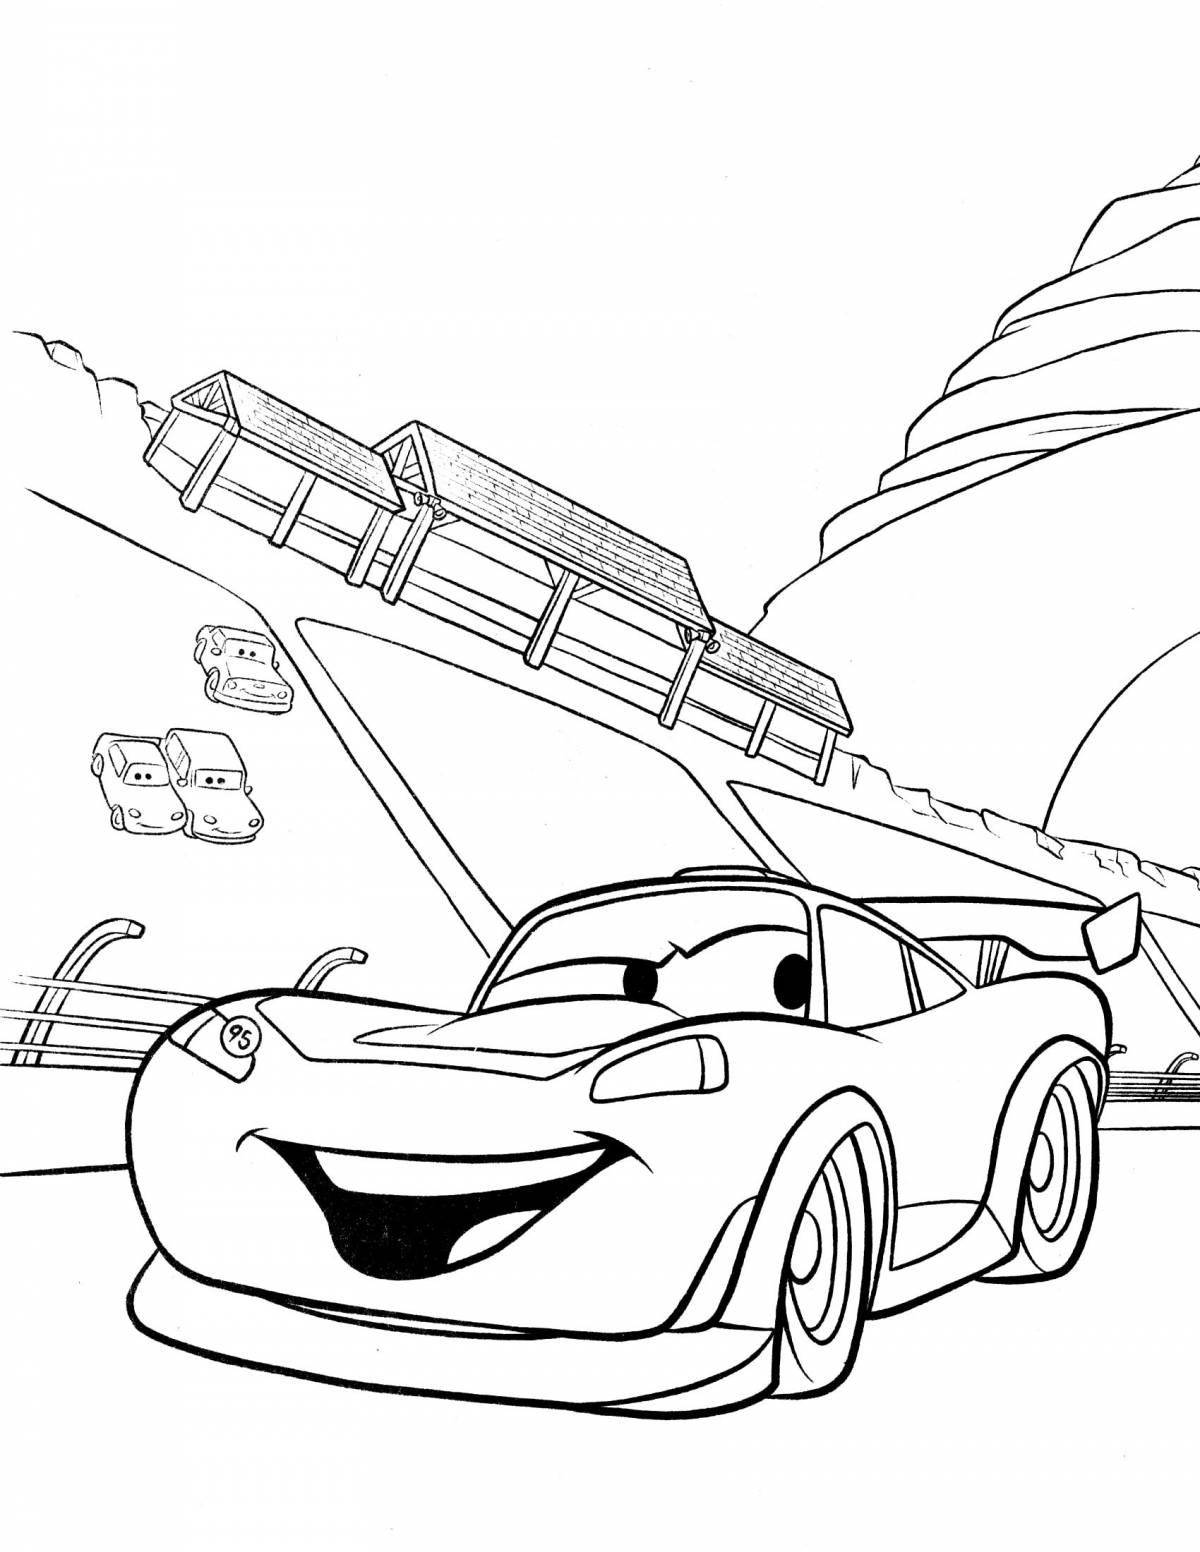 Bright cars makvin coloring pages